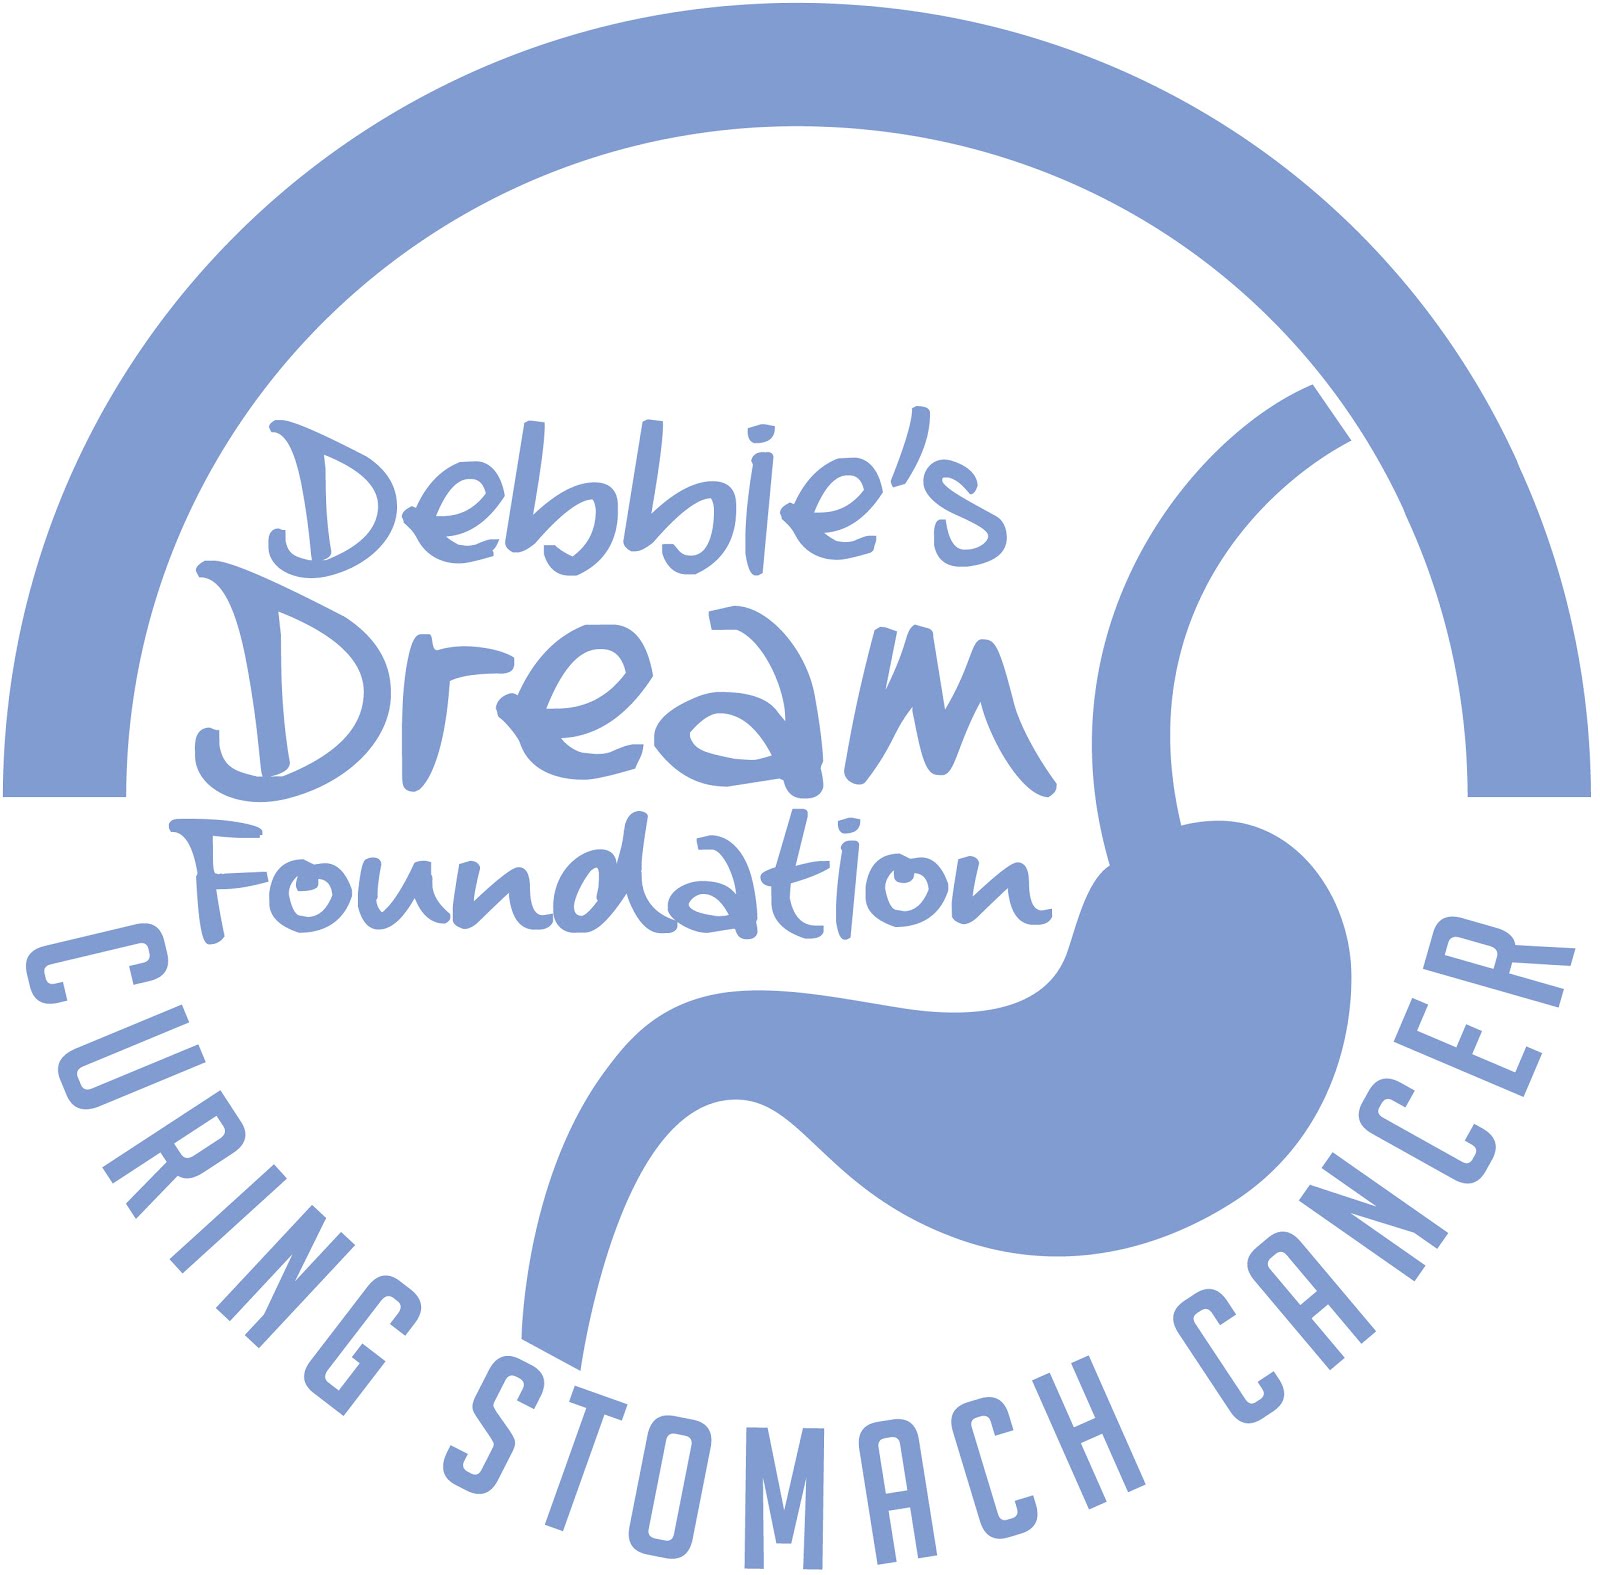 Debbies Dream Foundation Curing Stomach Cancer